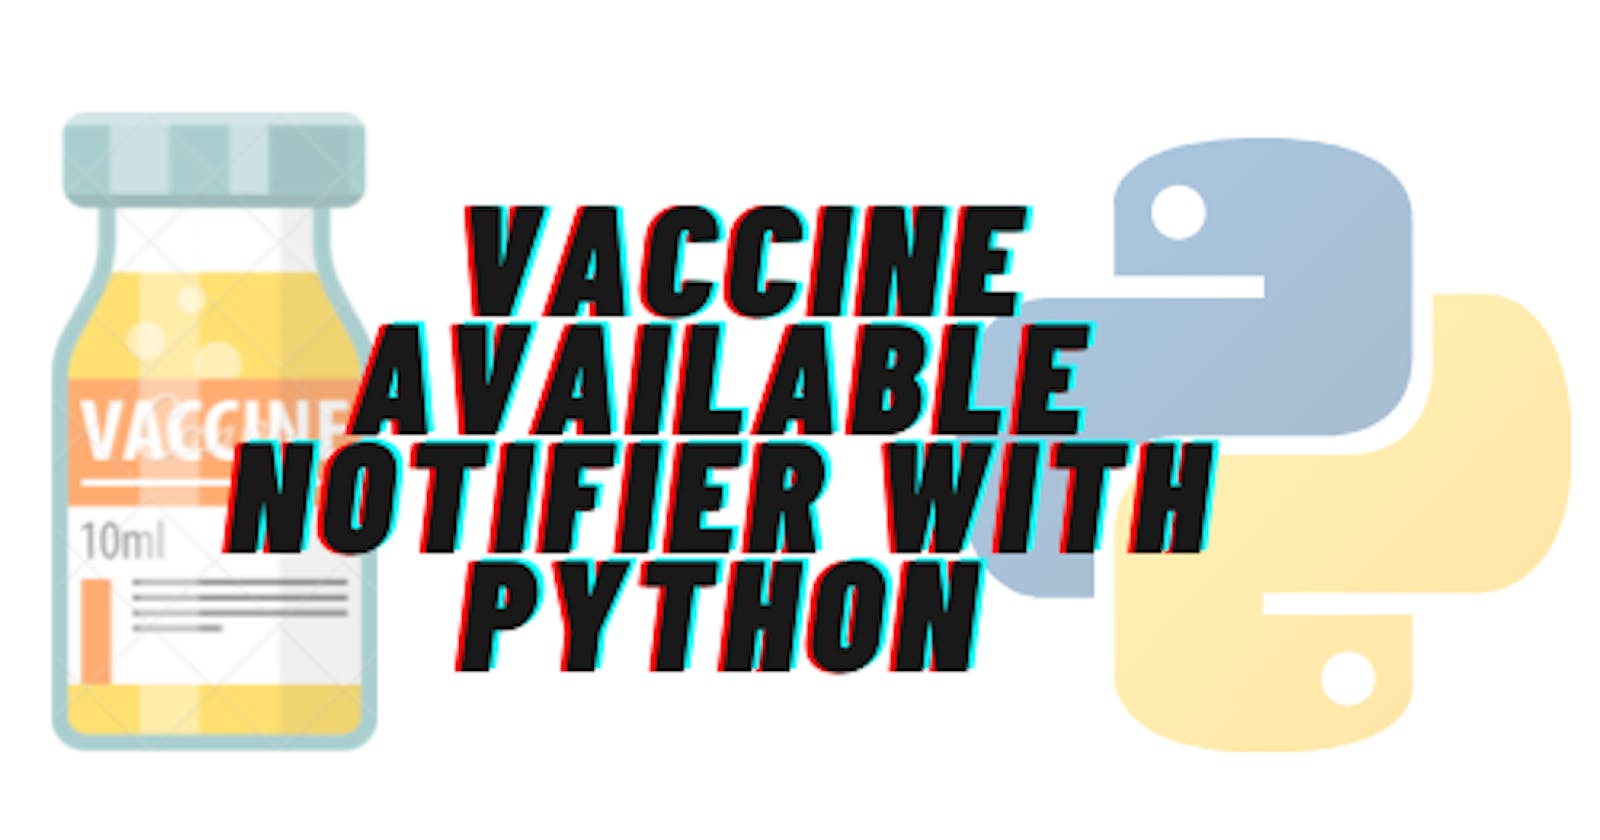 How I created a vaccine available desktop notifier app using only python